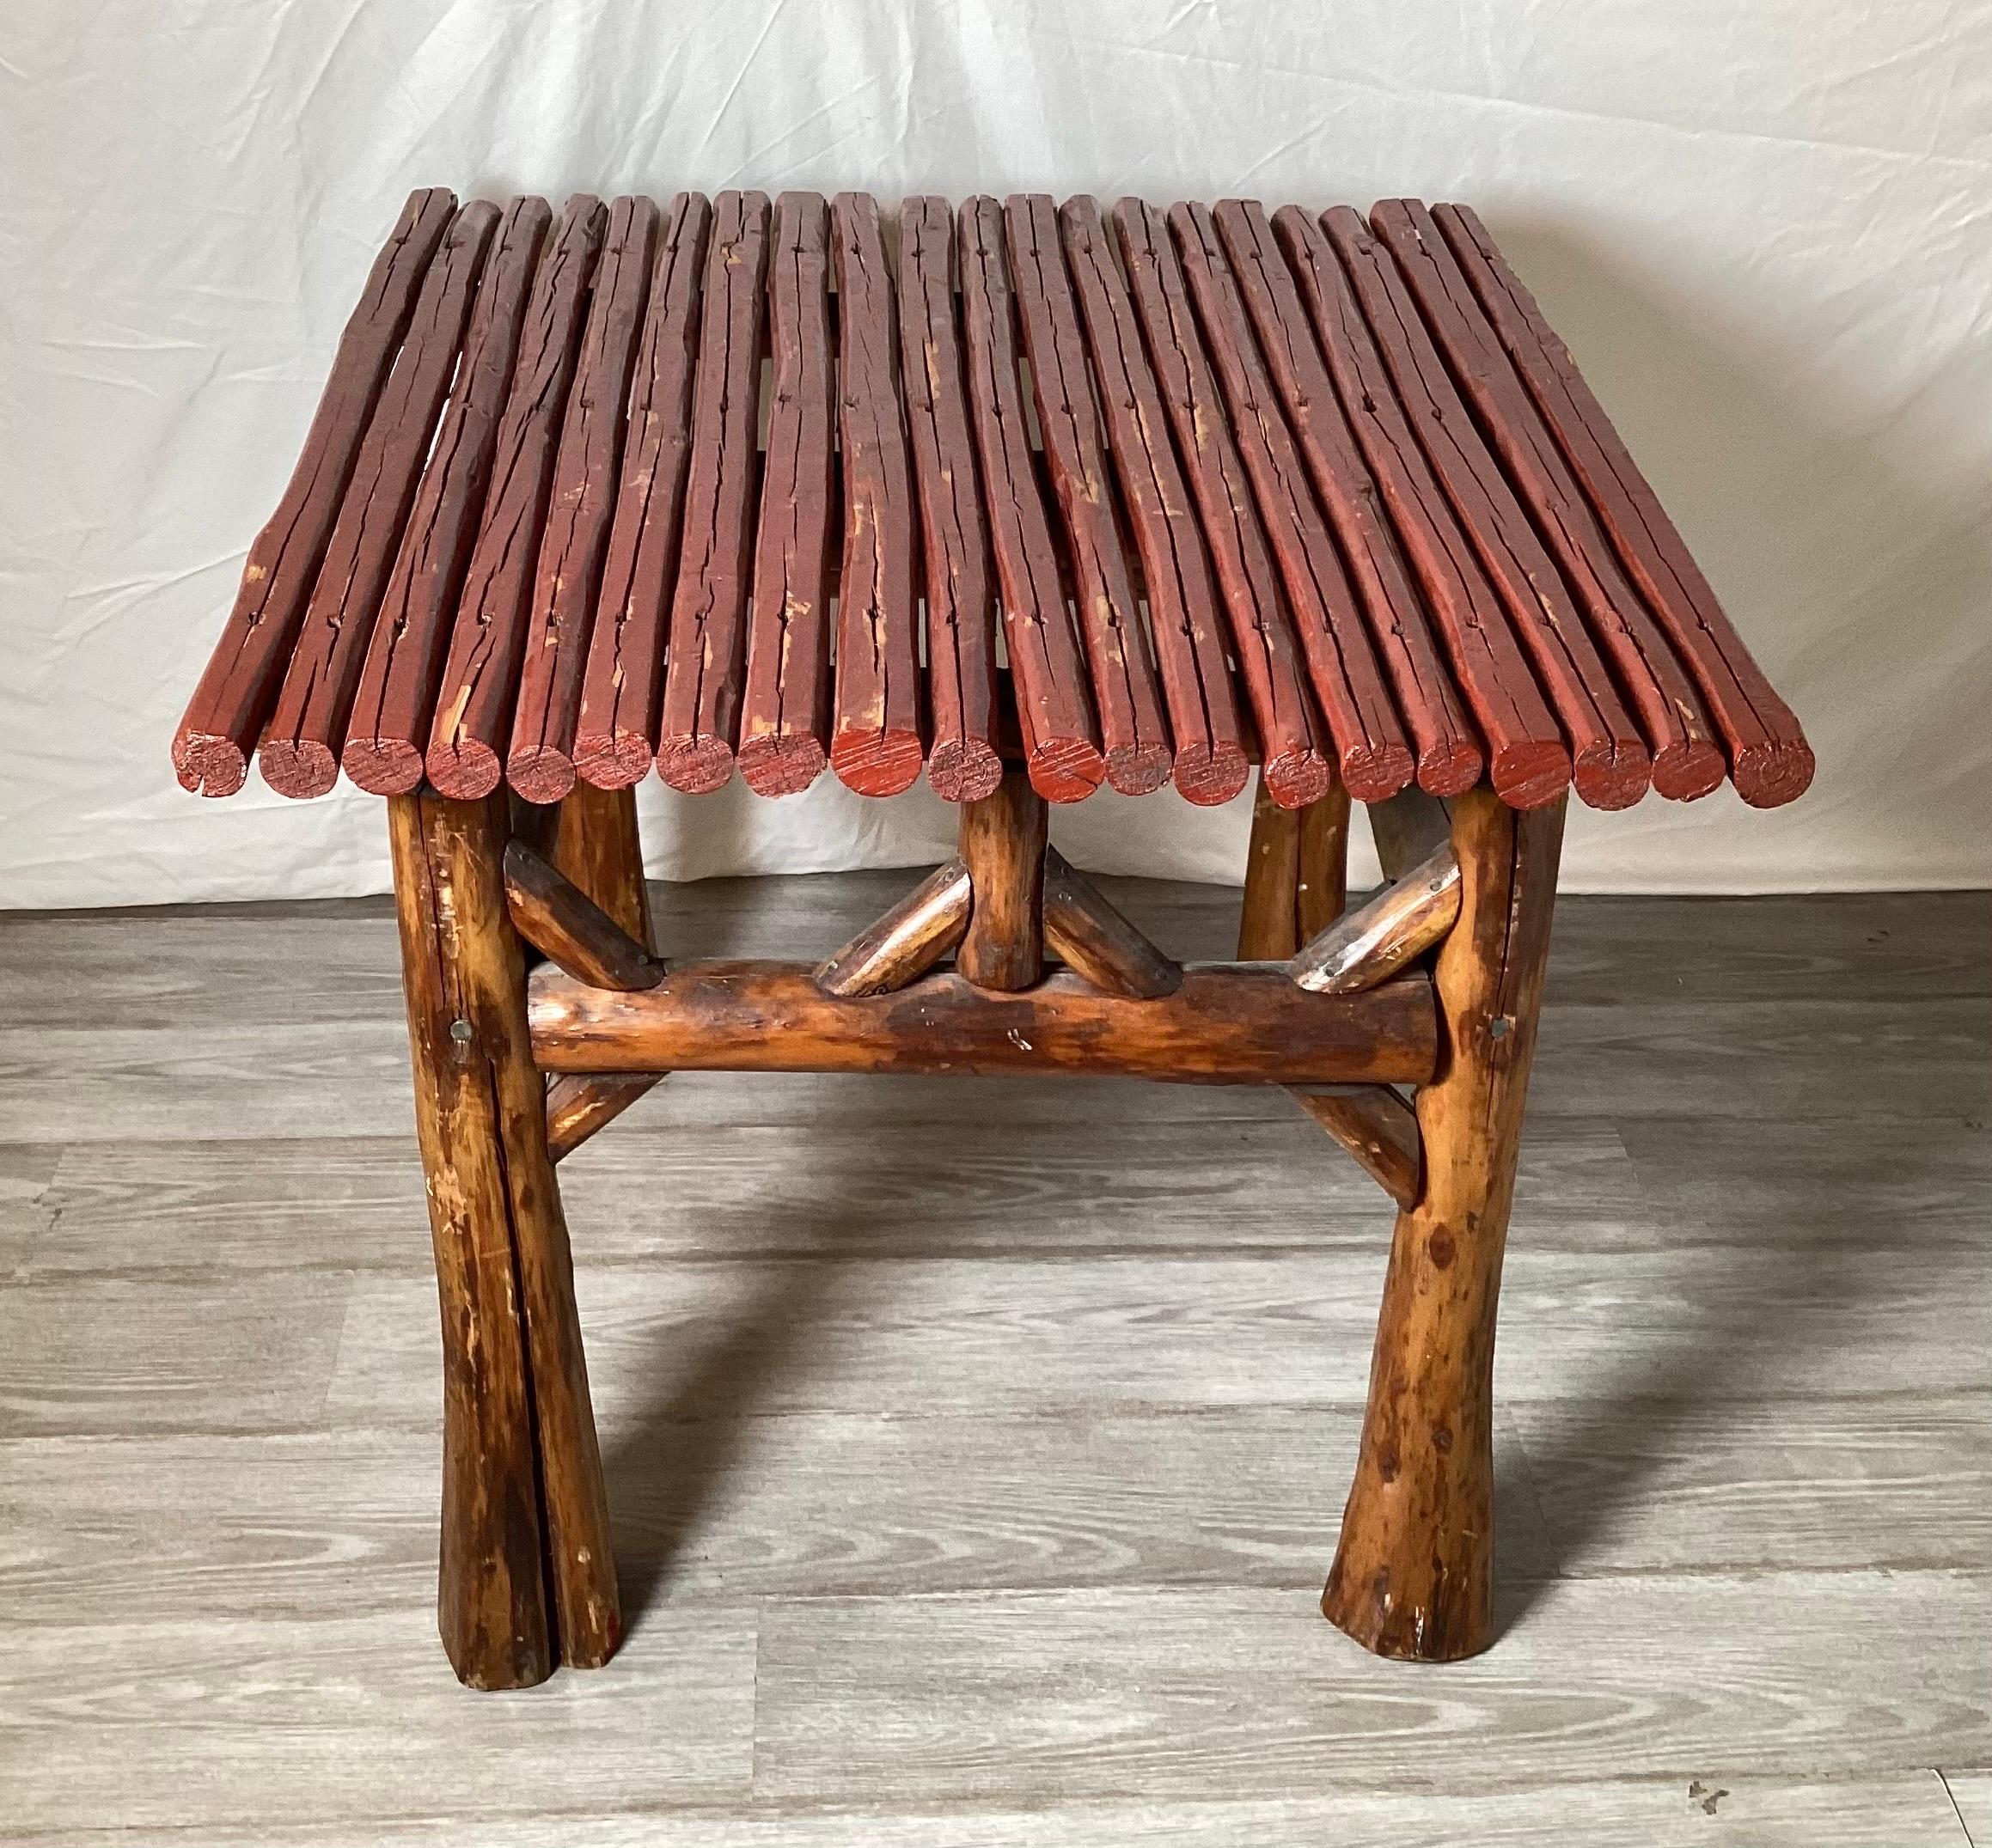 A square Adirondack table with red painted top. This sturdy table with wood finished legs and red pained branch top. The top with wear and old splits, but sturdy and usable. 27 inches tall, 30 inches square.